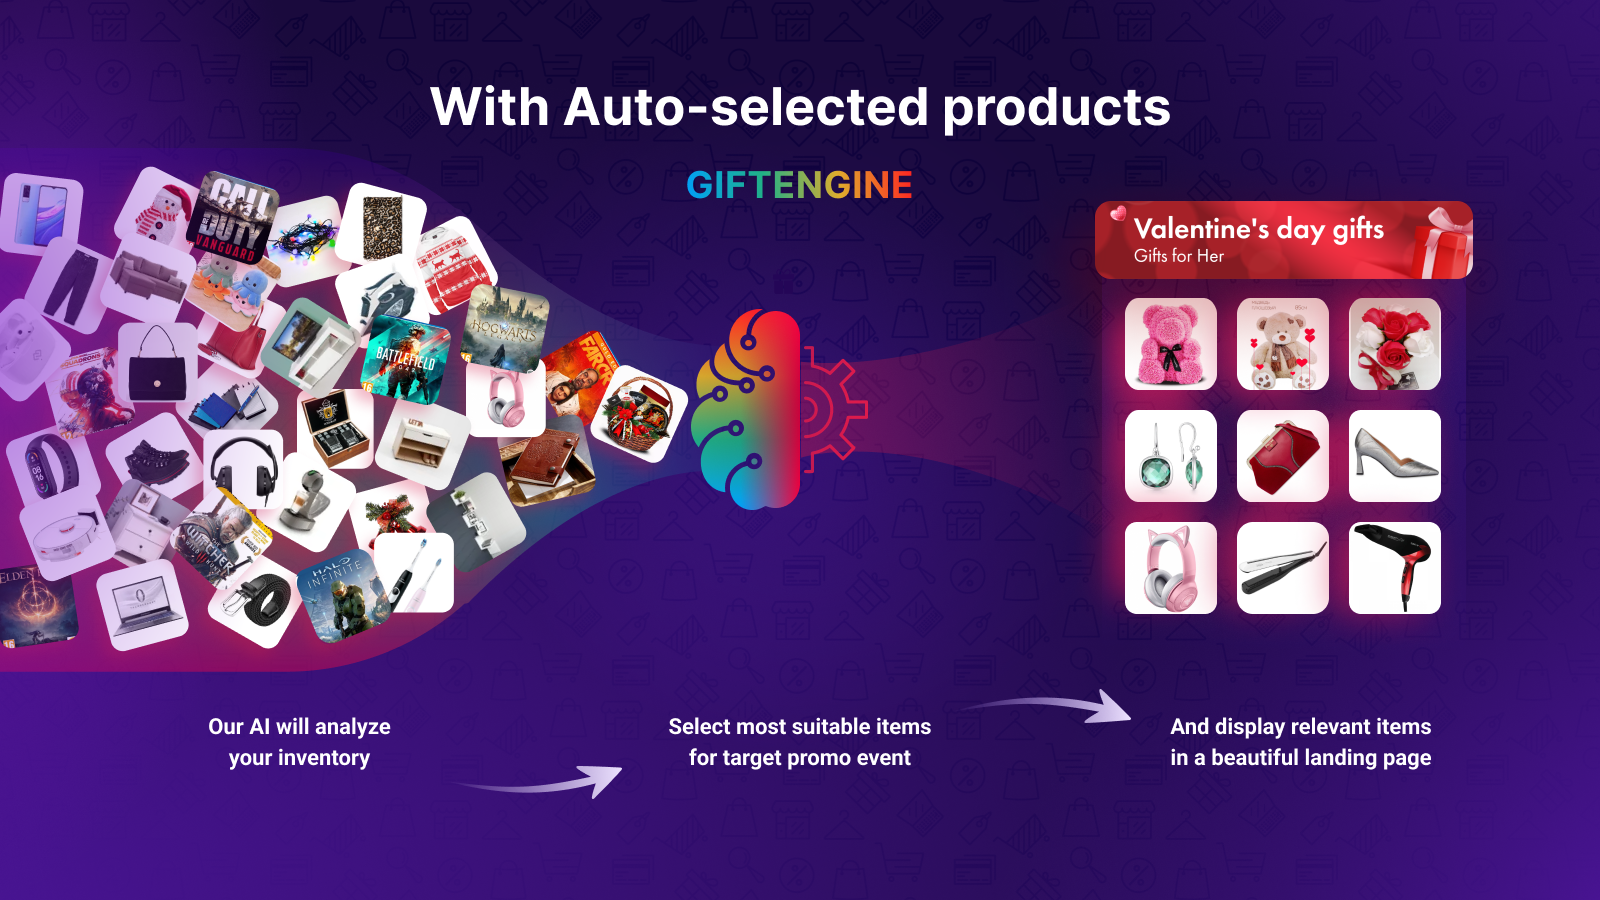 Auto-selected products